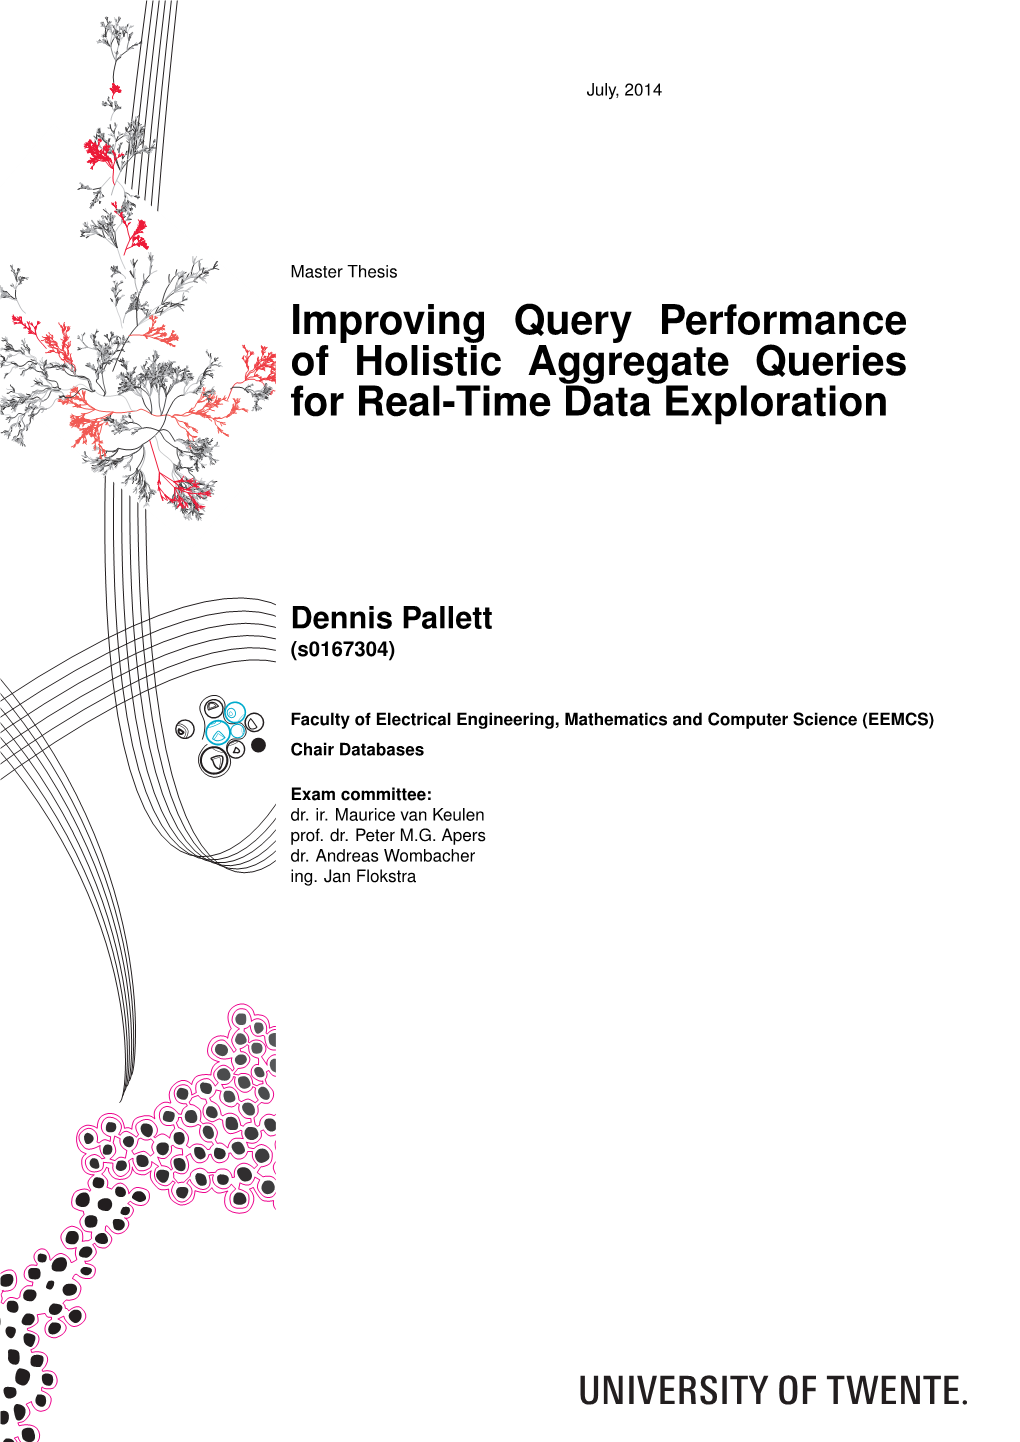 Improving Query Performance of Holistic Aggregate Queries for Real-Time Data Exploration